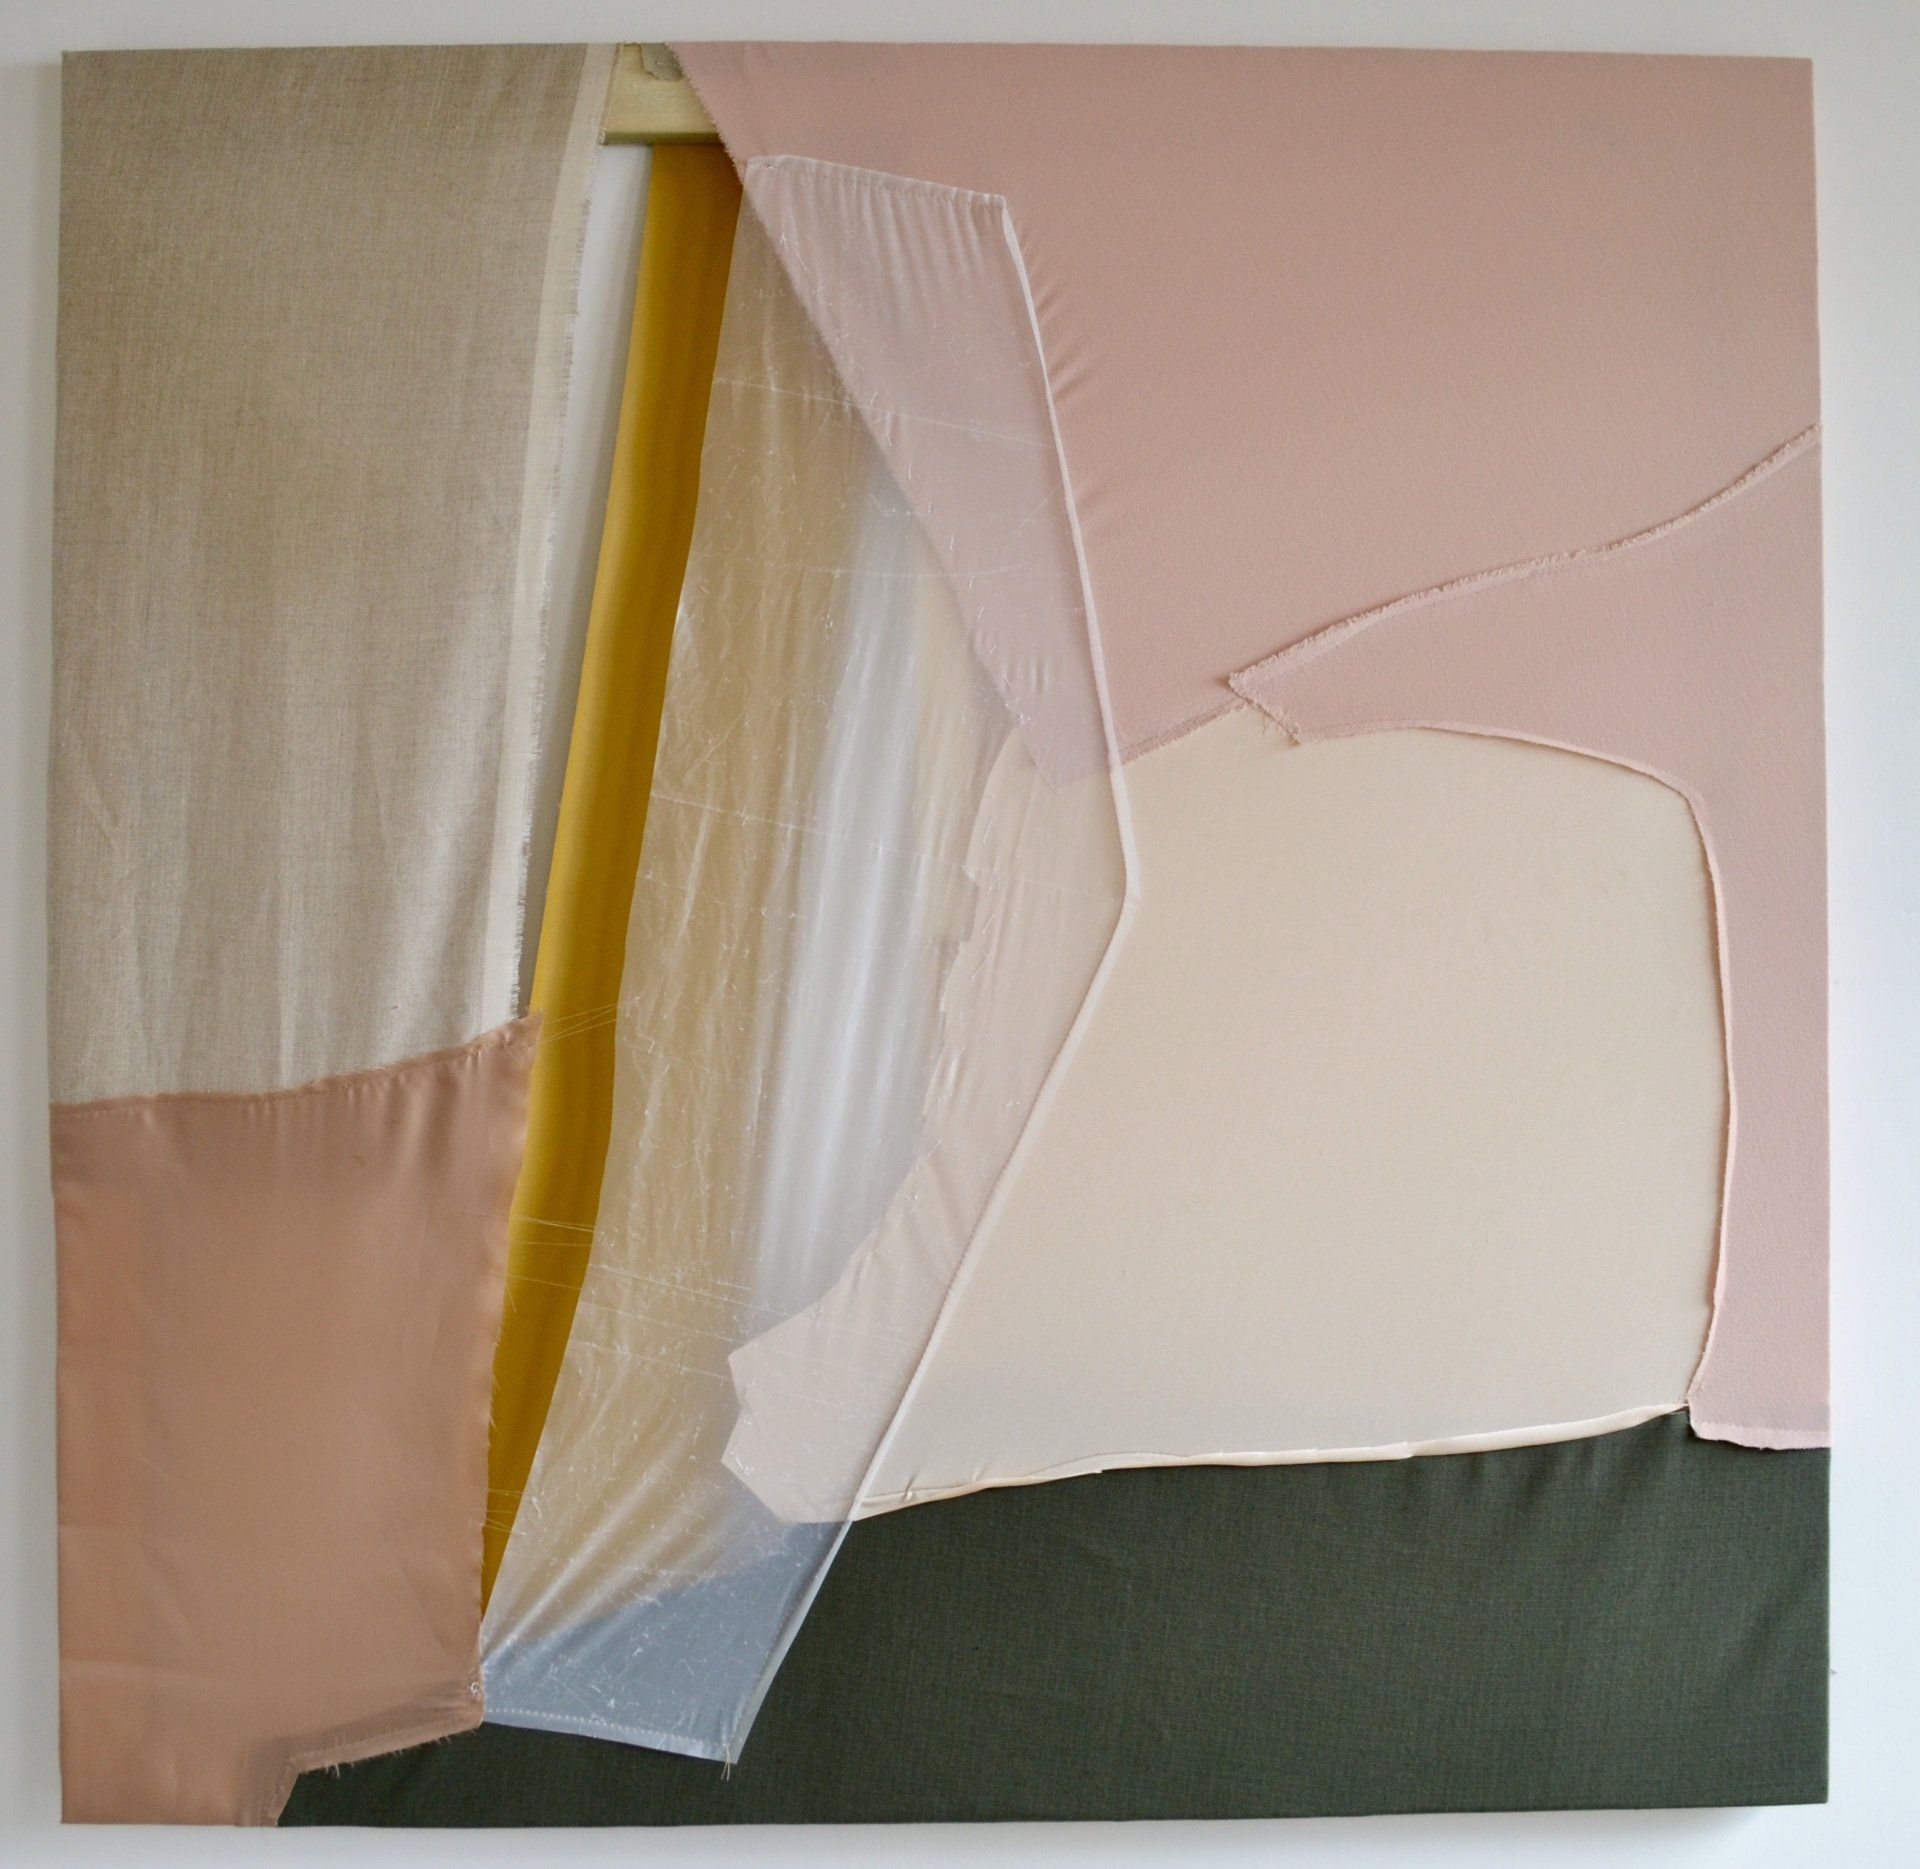 Sewn fabric painting in pink, yellow and cream by artist Siobhan McLaughlin